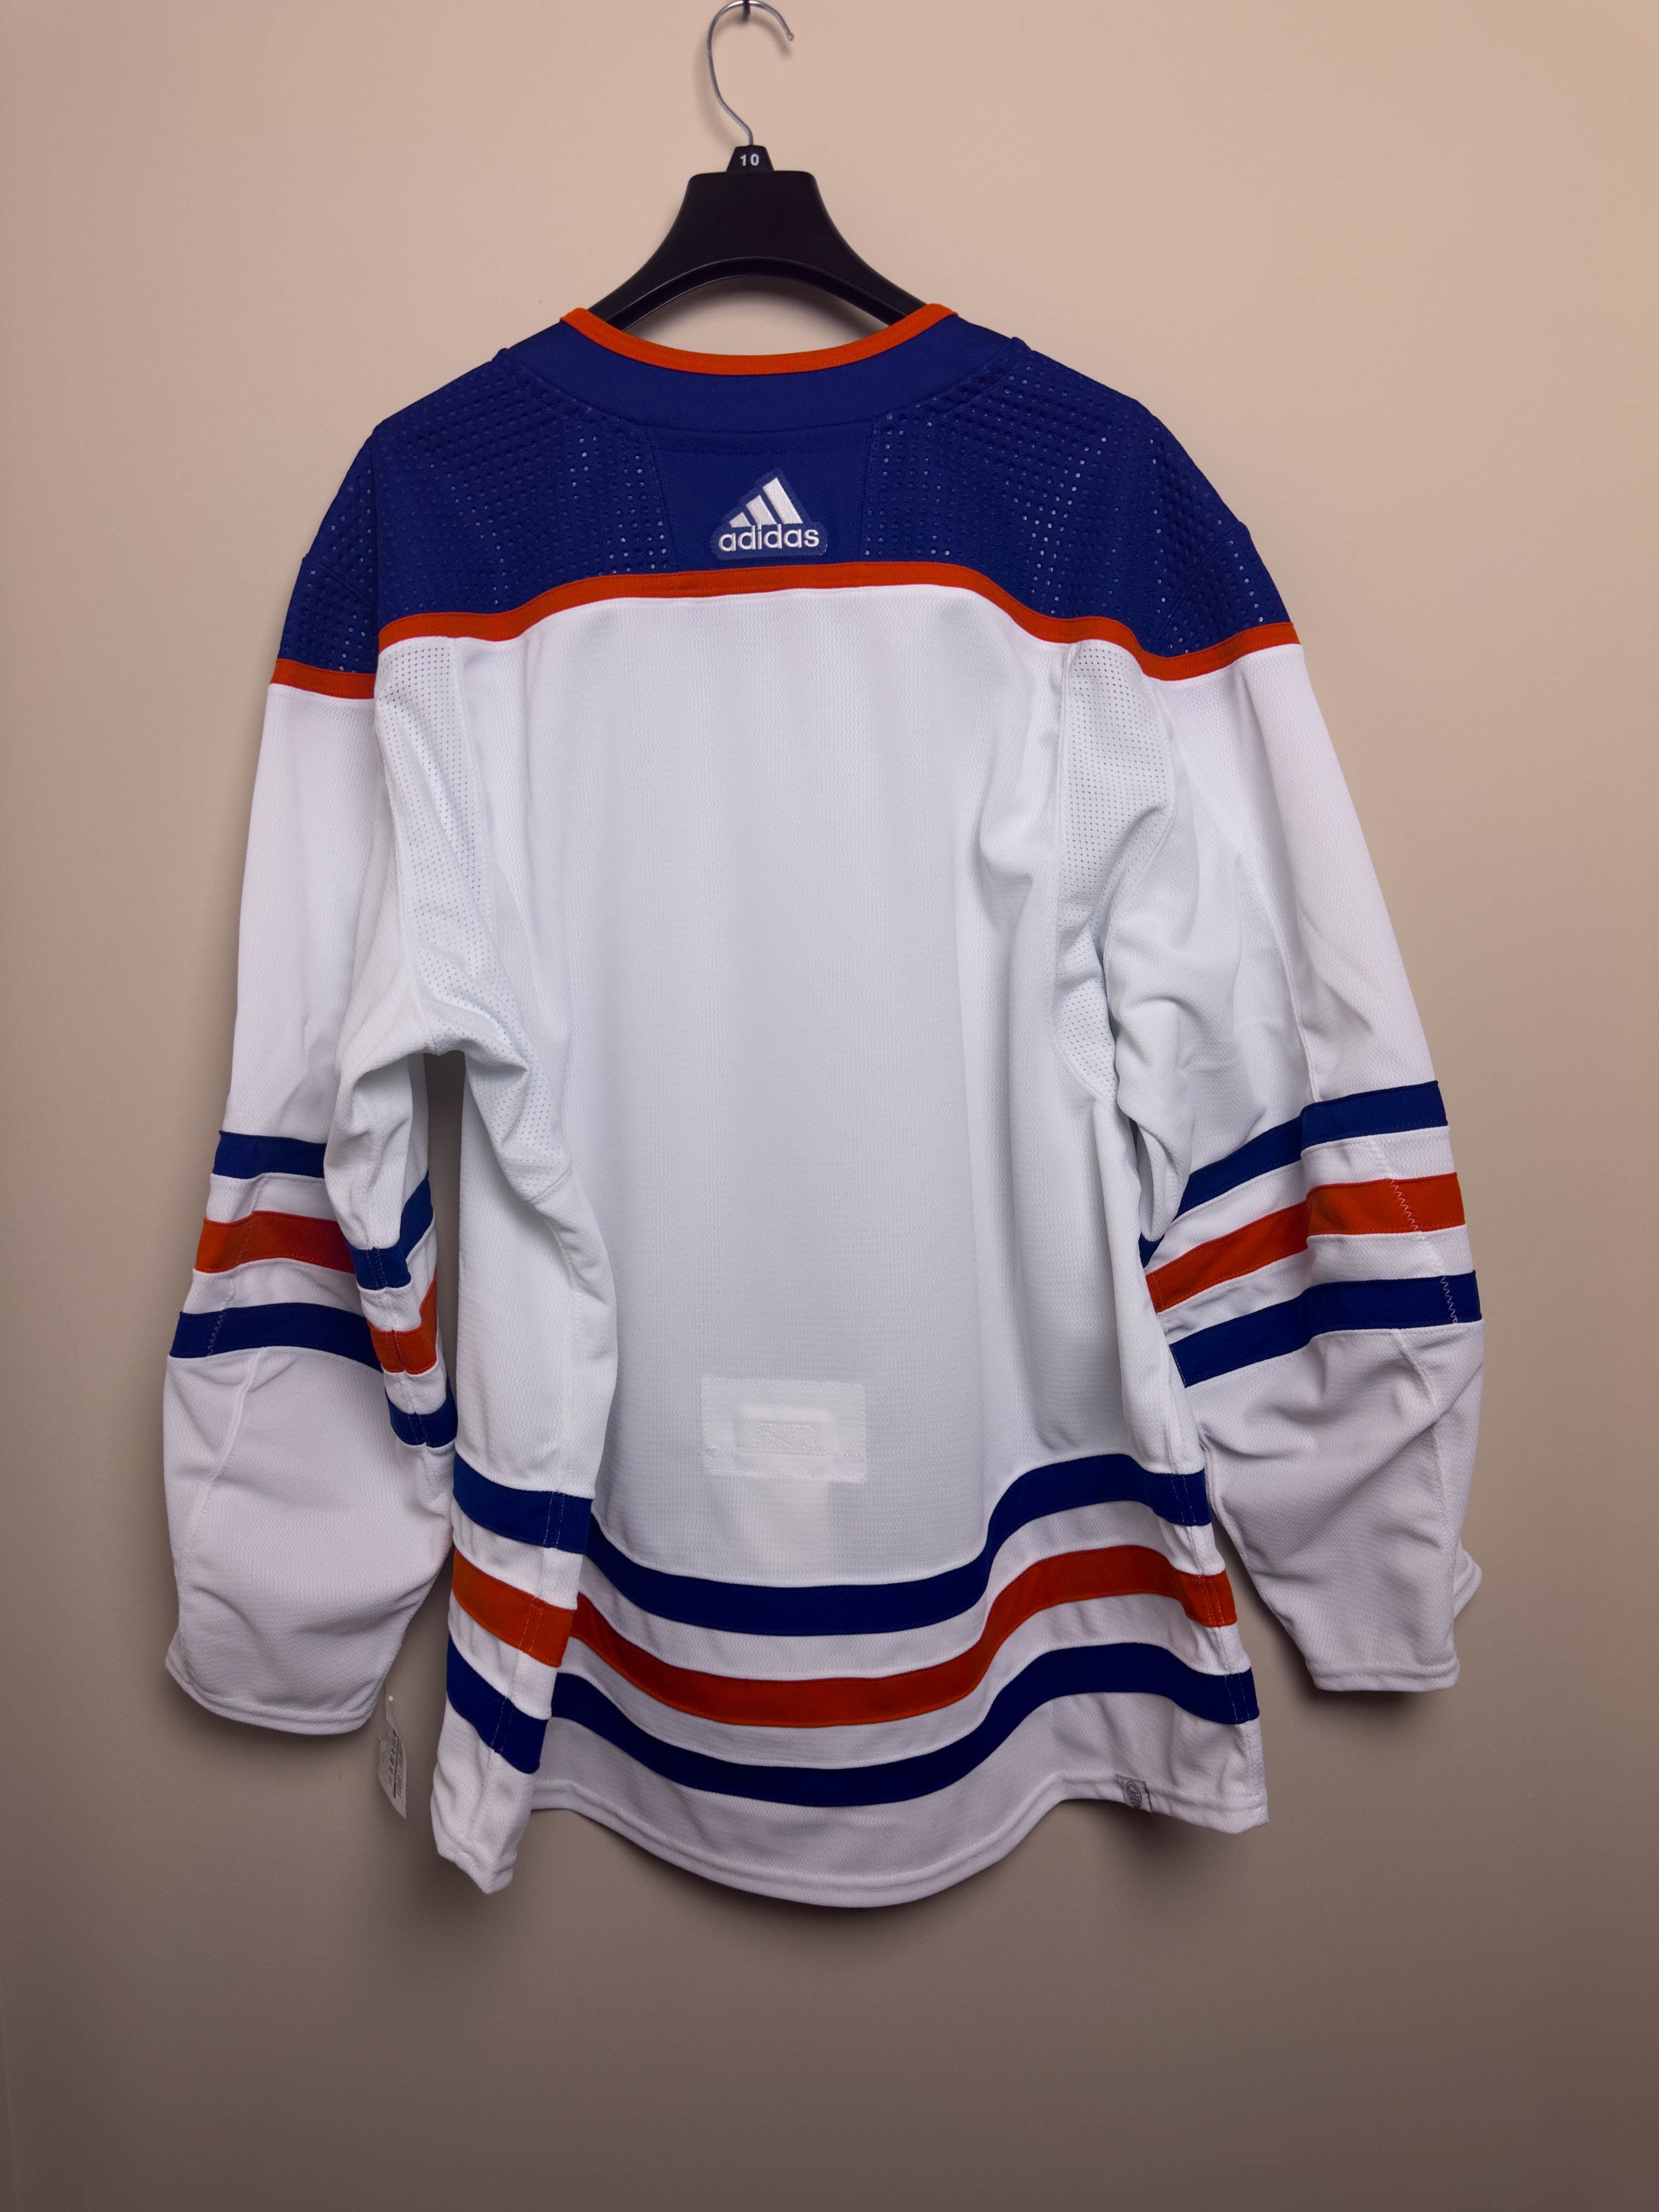 Edmonton Oilers NHL Adidas MiC Team Issued Away Jersey Size 56 (Player Size)